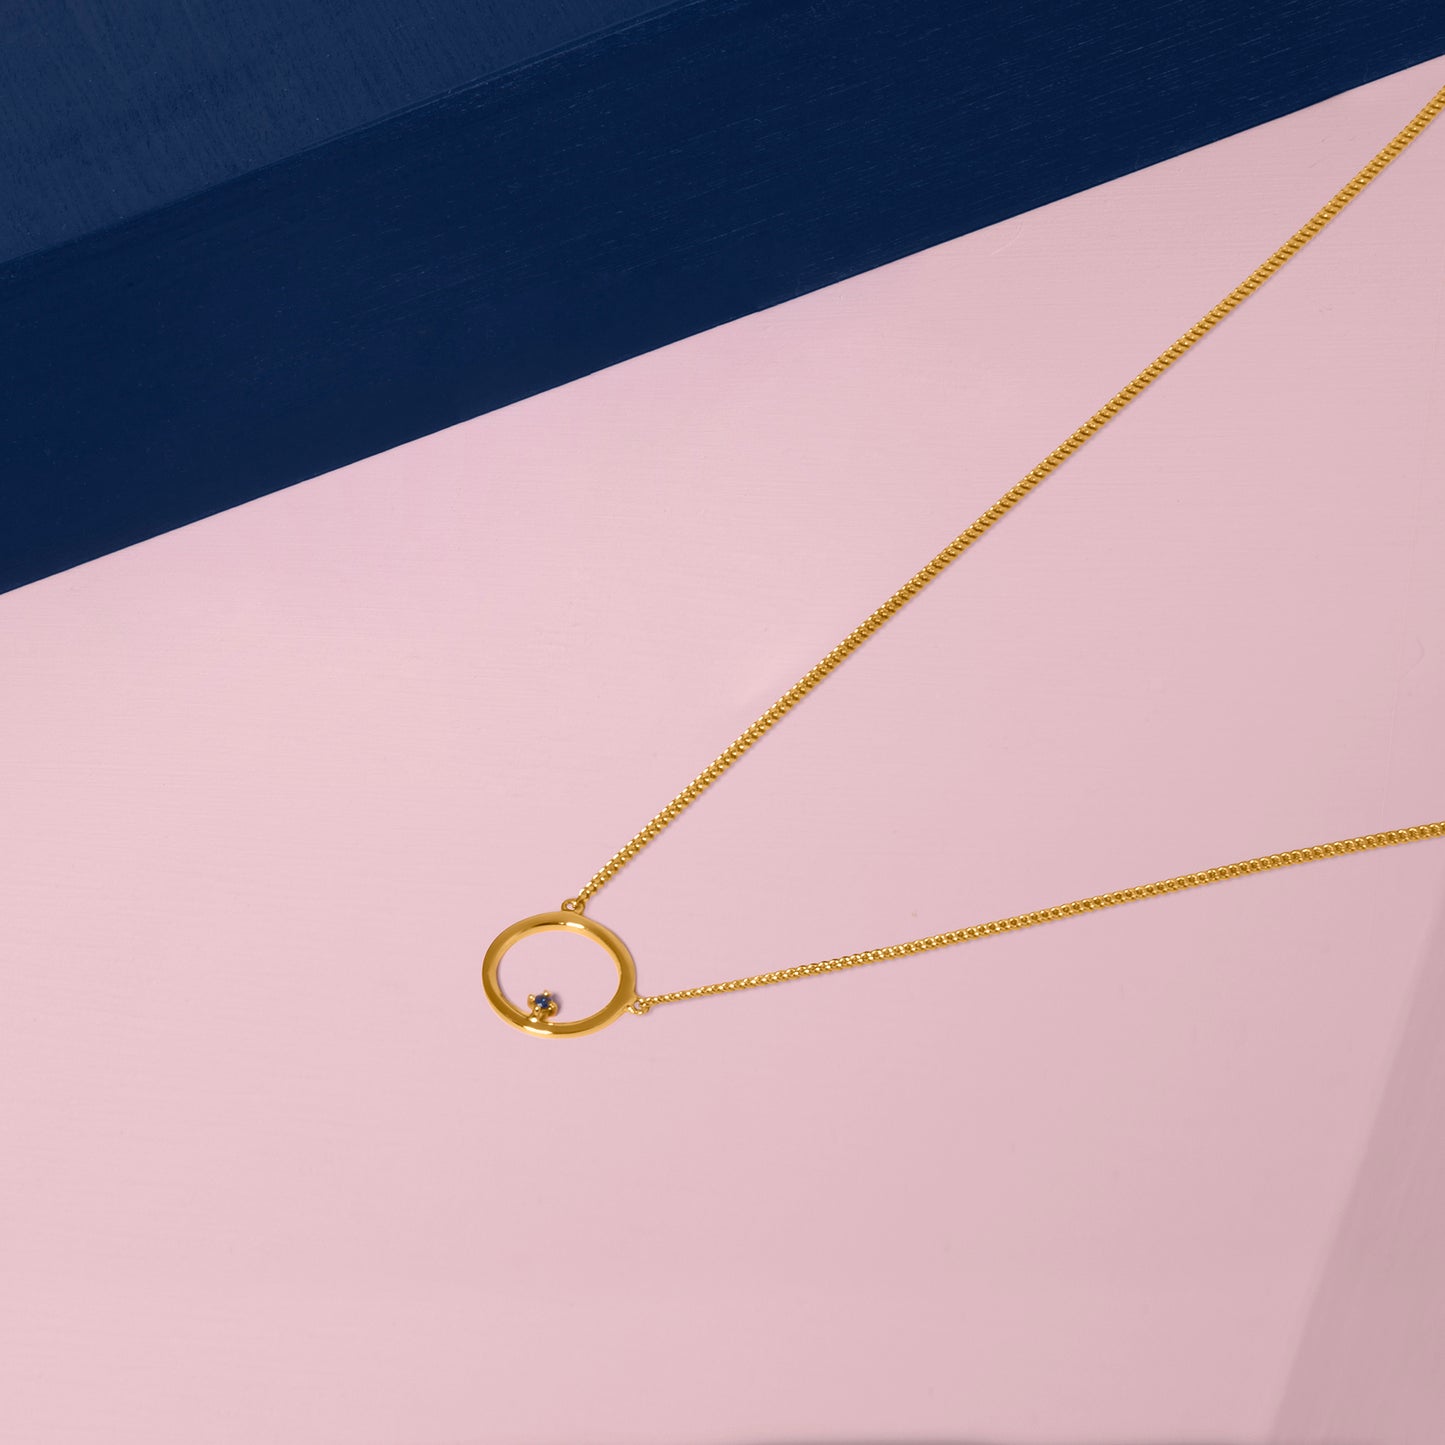 Free To Roam Necklace Gold Styled On Pink and Blue 